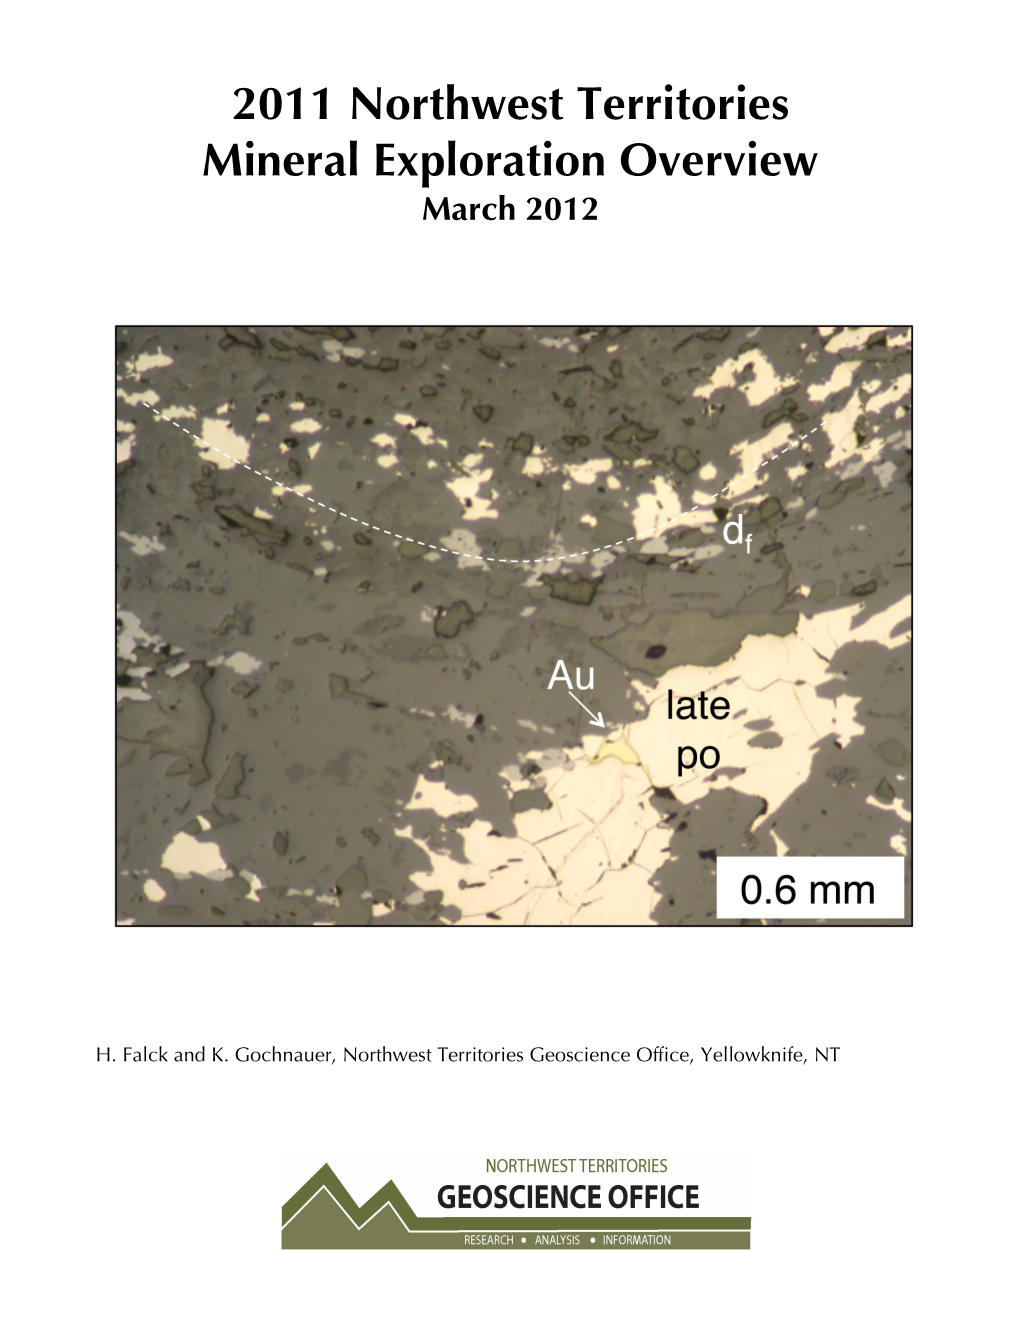 2011 NWT Mineral Exploration Overview, March 2012 3